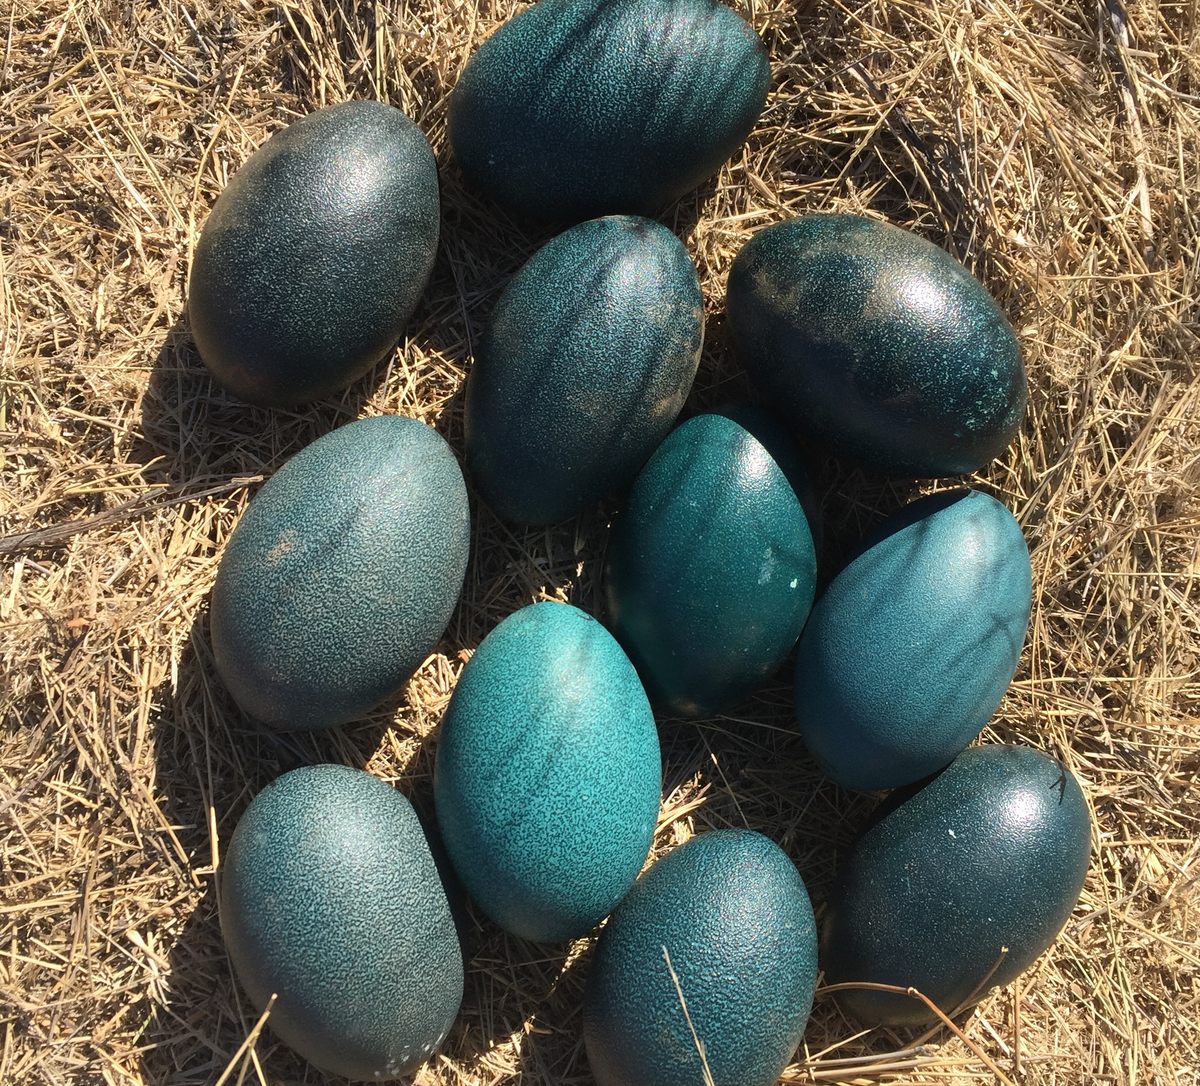 The number of emu eggs per clutch varies from a few to dozens; each egg weighs more than a pound.